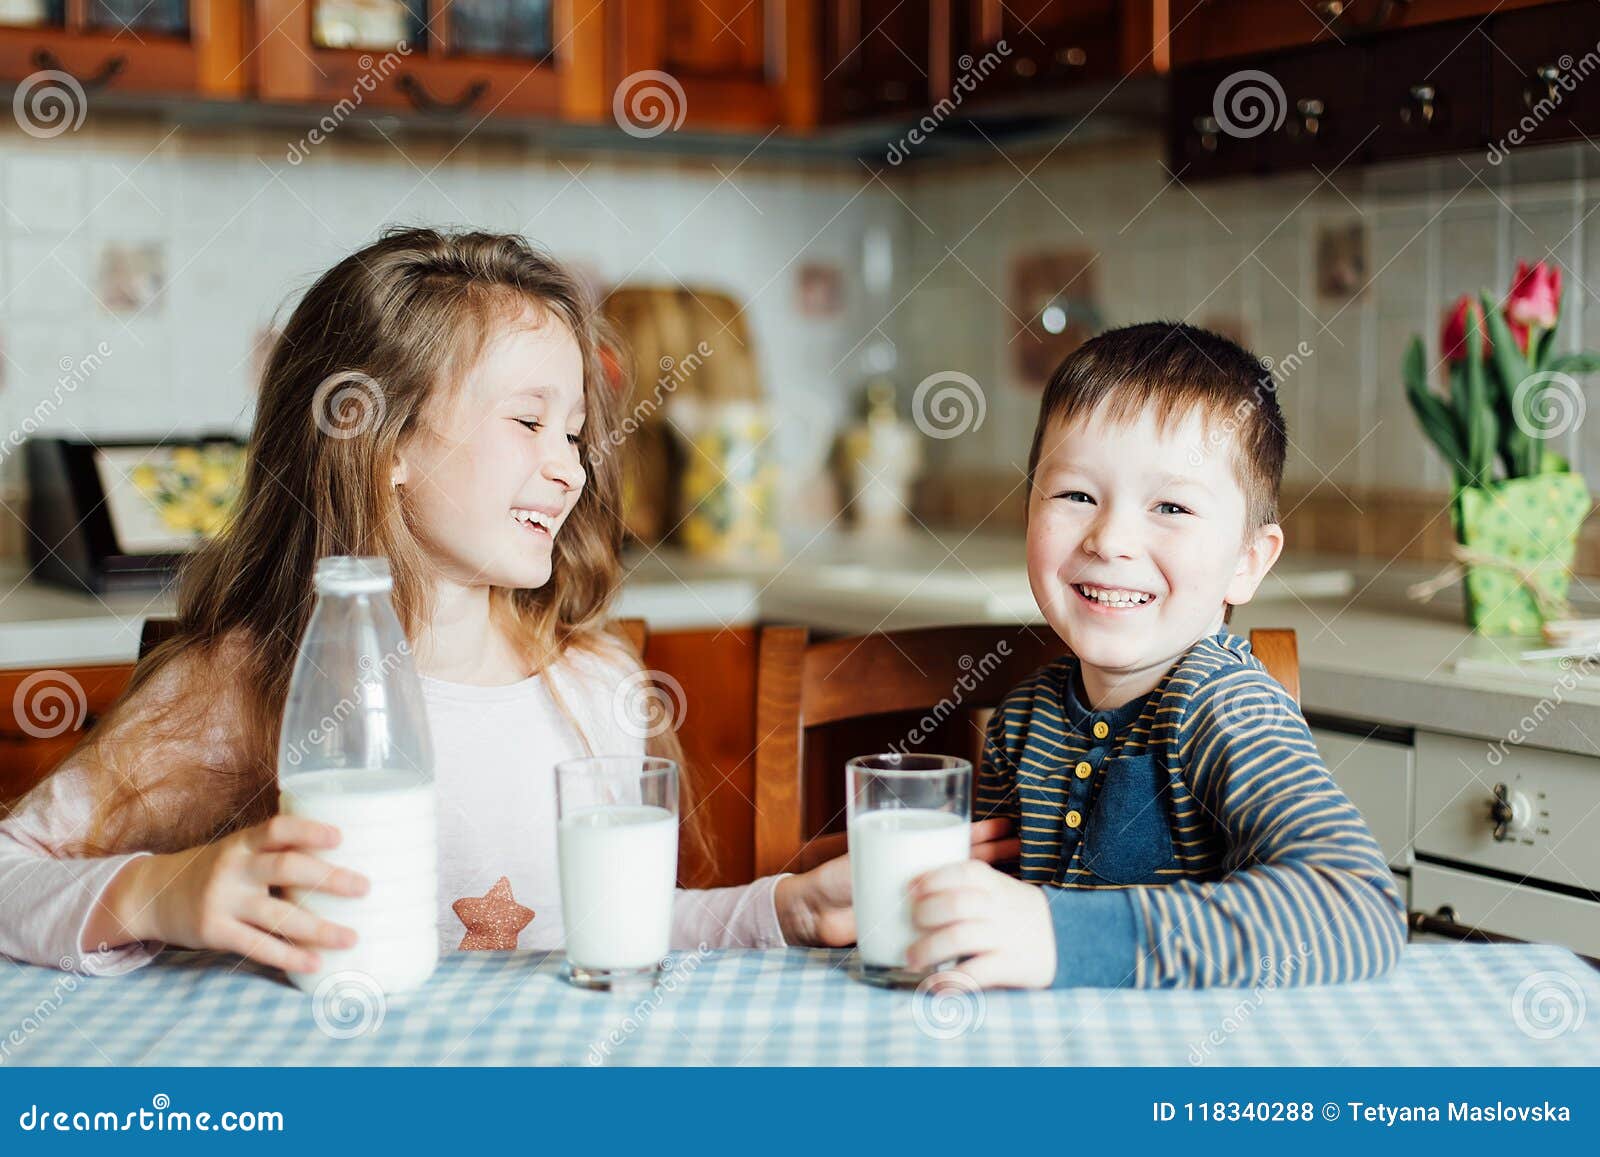 Children Drink Milk and Have Fun in the Kitchen at the Morning. Sister and  Brother Prepare Cocoa Stock Photo - Image of cosiness, brother: 118340288